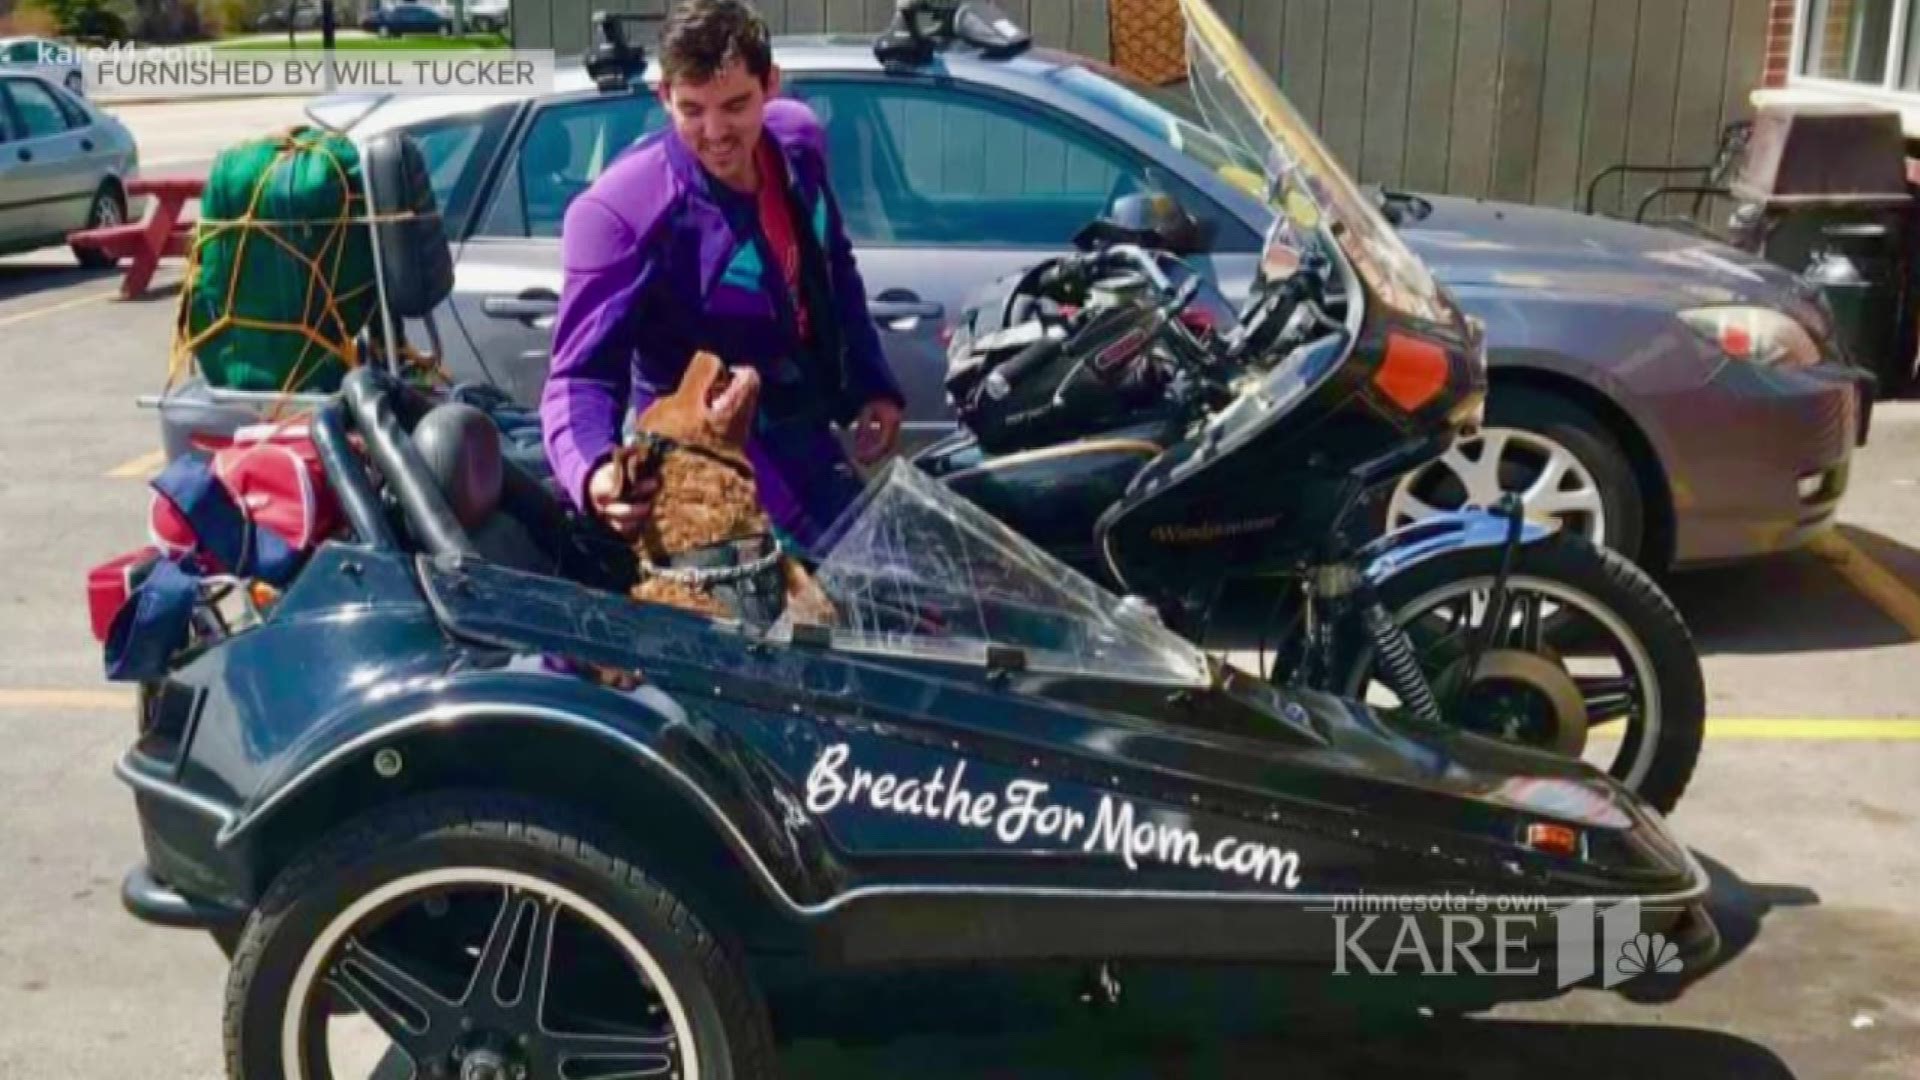 Will Tucker traveled by motorcycle from Minnesota to Maryland with his dog to raise money for research for the lung disease that took his mother's life.